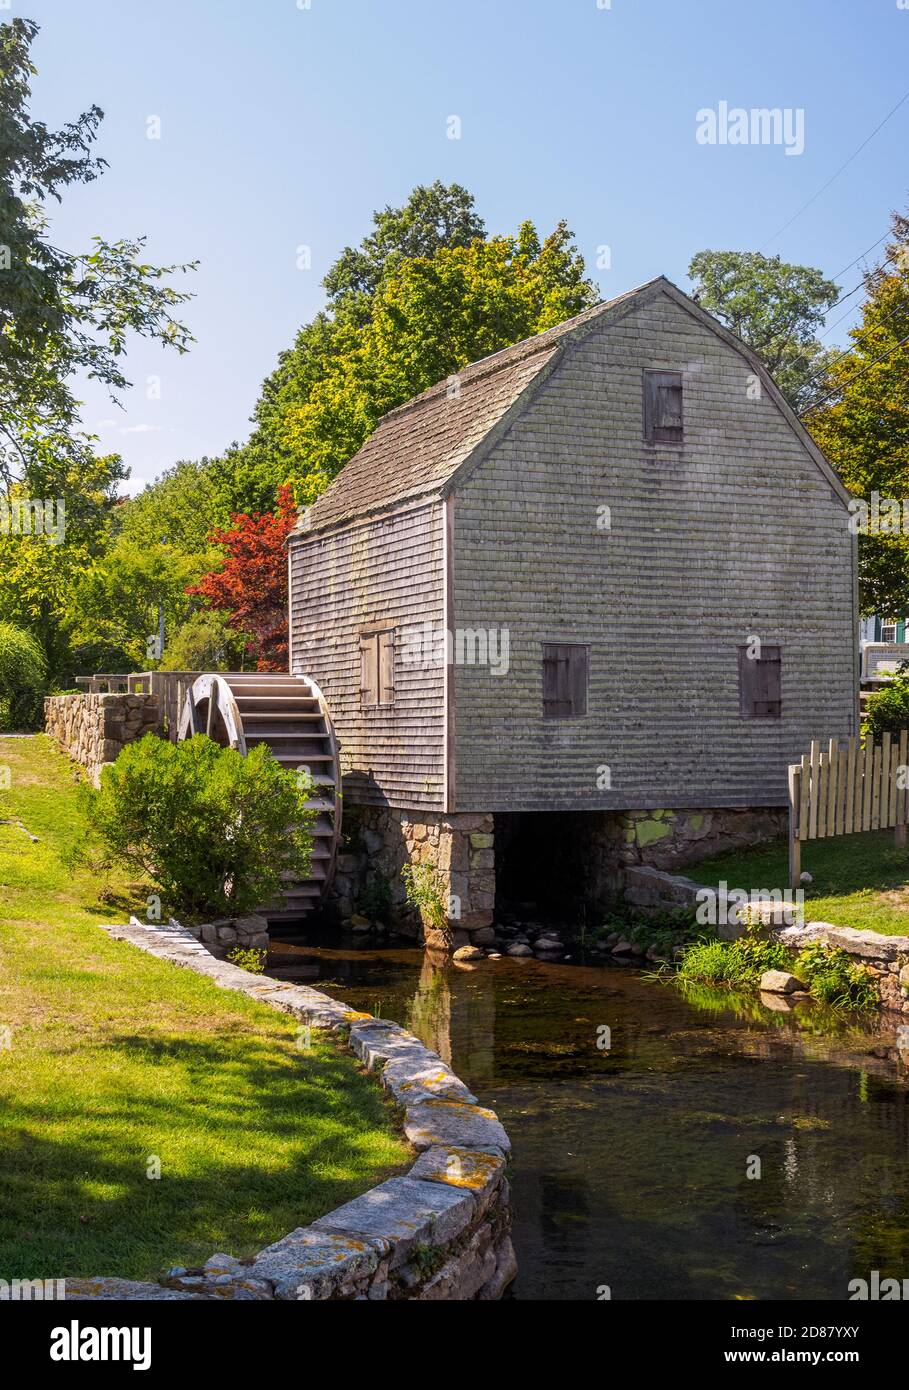 Dexter Grist Mill, Sandwich, Cape Cod Massachusetts USA side view with undershot wooden water wheel and millrace in early September 2016. Stock Photo